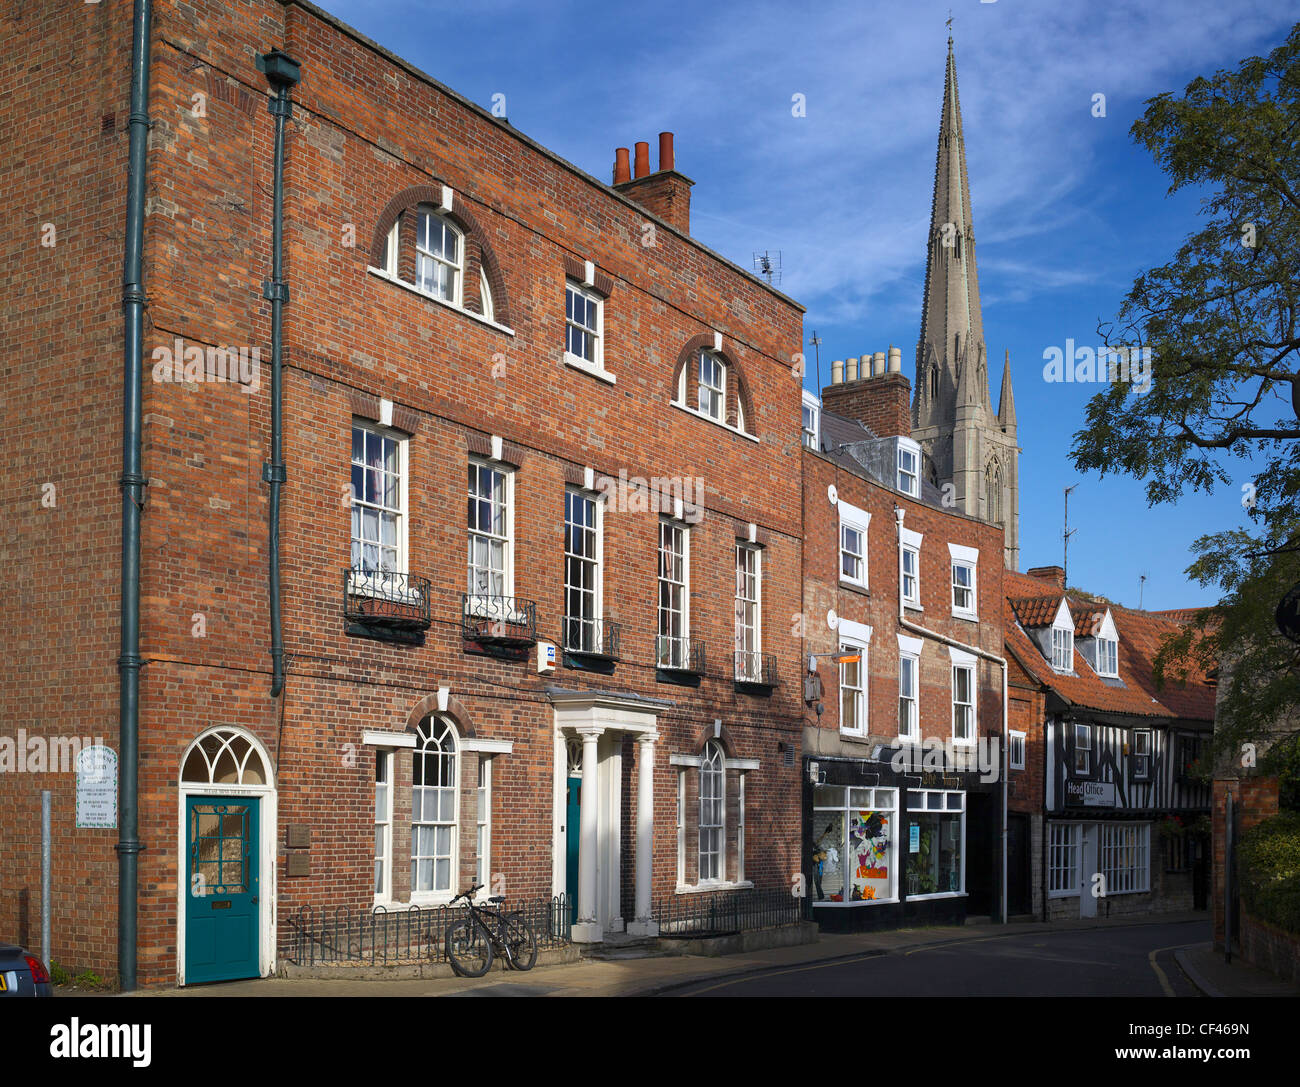 A view along Vine Street in Grantham.  Grantham is the birth place of former British Prime Minister Margaret Thatcher. Stock Photo